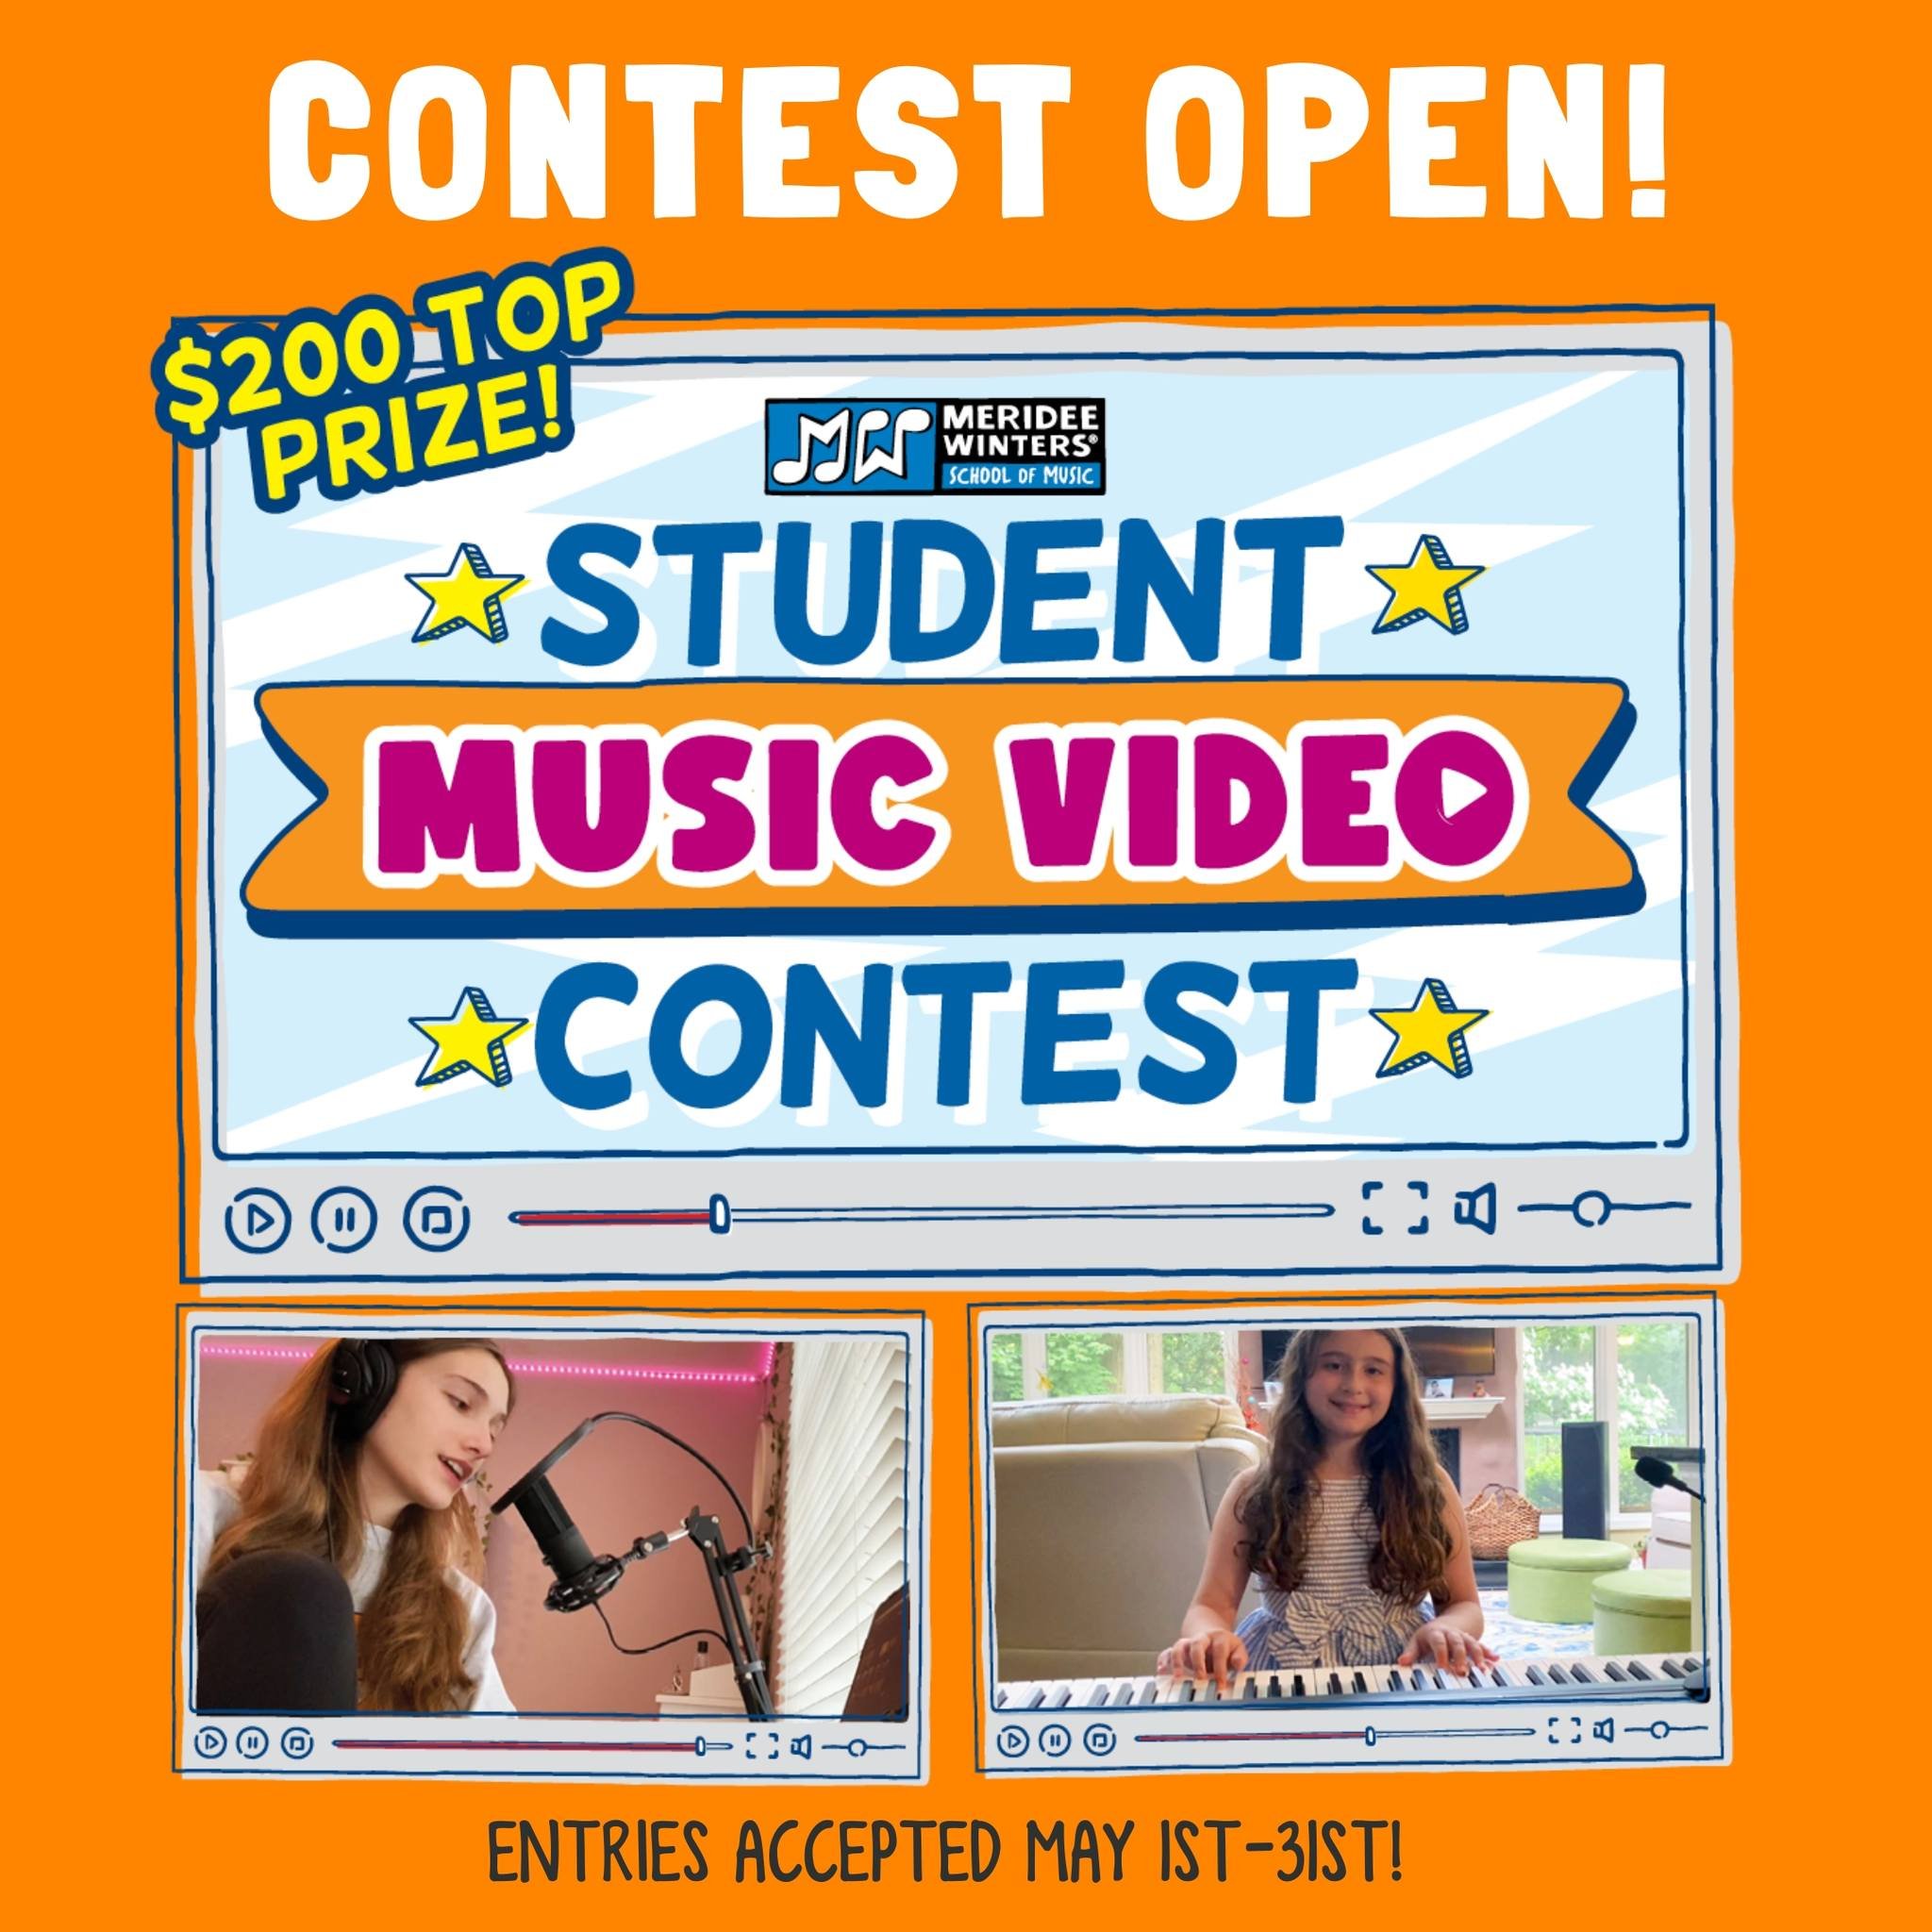 Our video contest is open for submissions! Visit https://www.mwschoolofmusic.com/contests for more info or to upload your submission